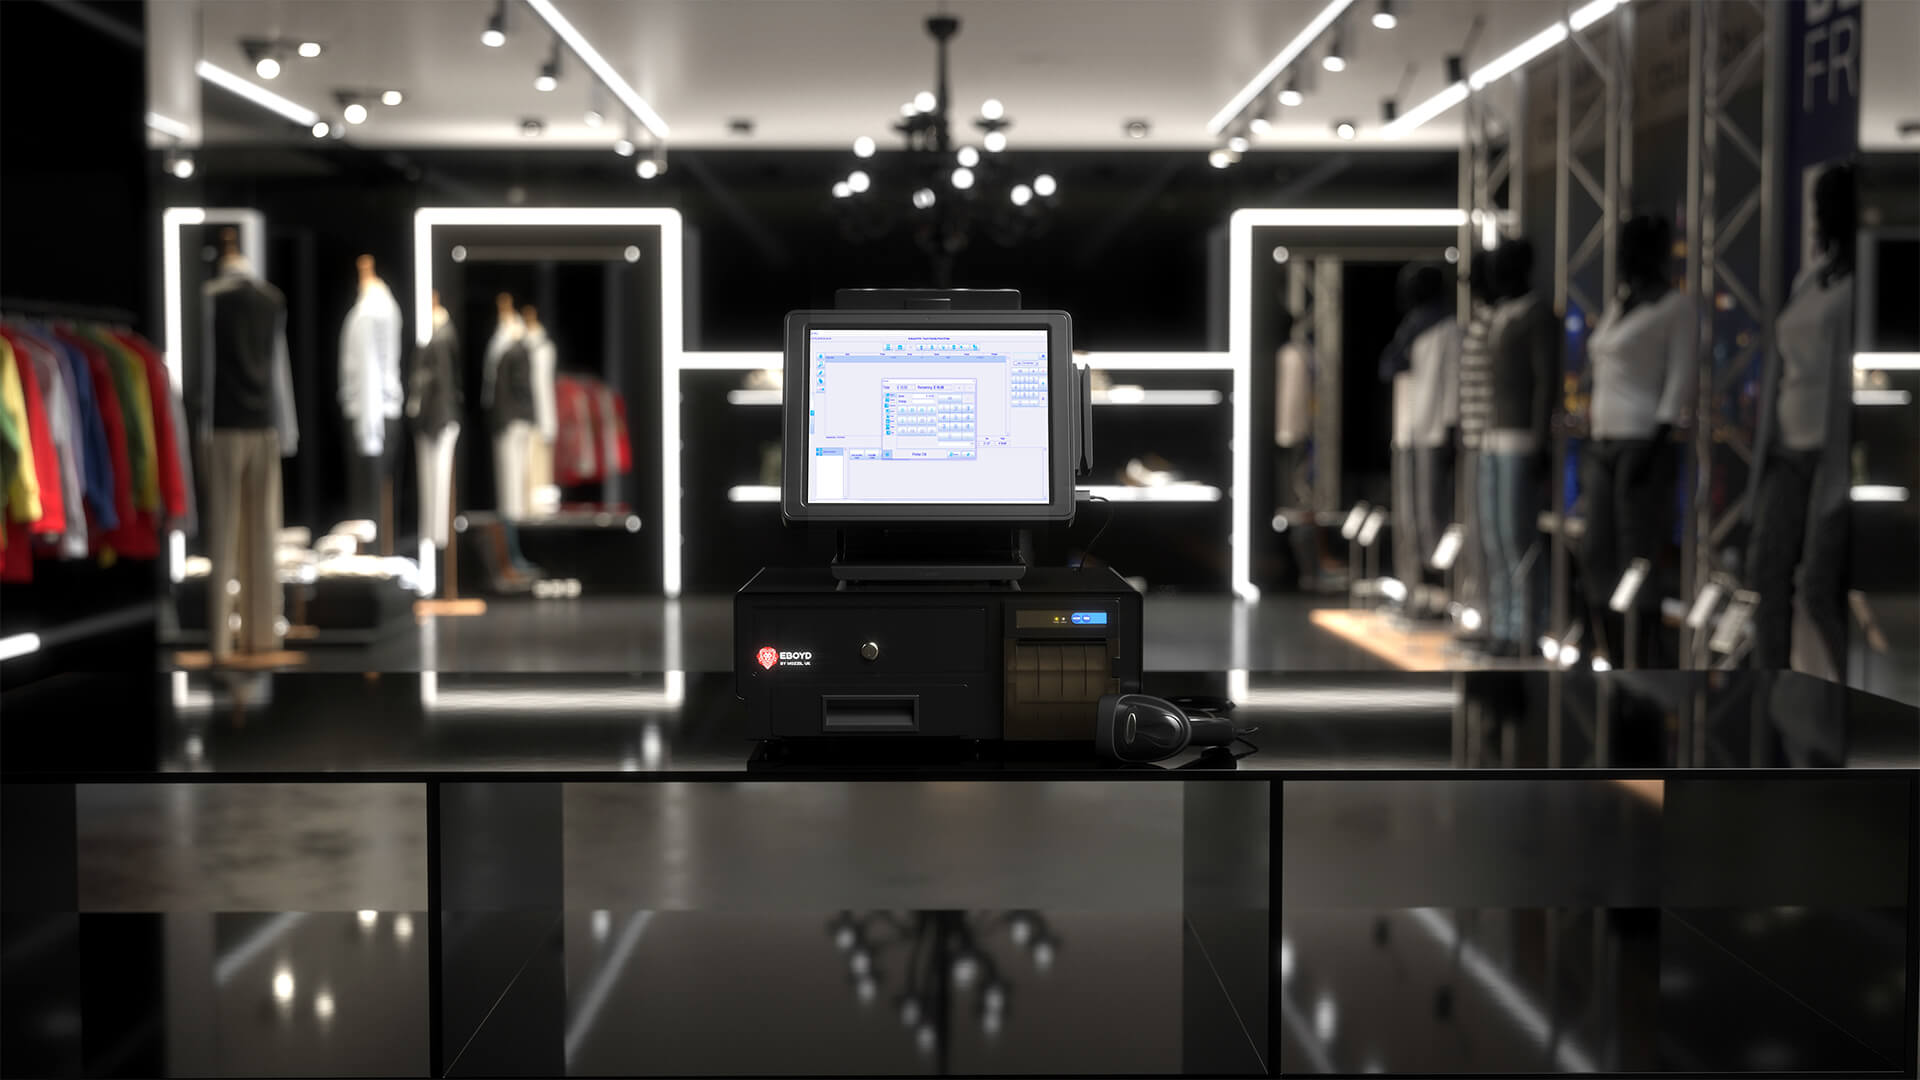 EBOYD EPOS System with Windows EPOS All-in-One Touch PC in a retail shop